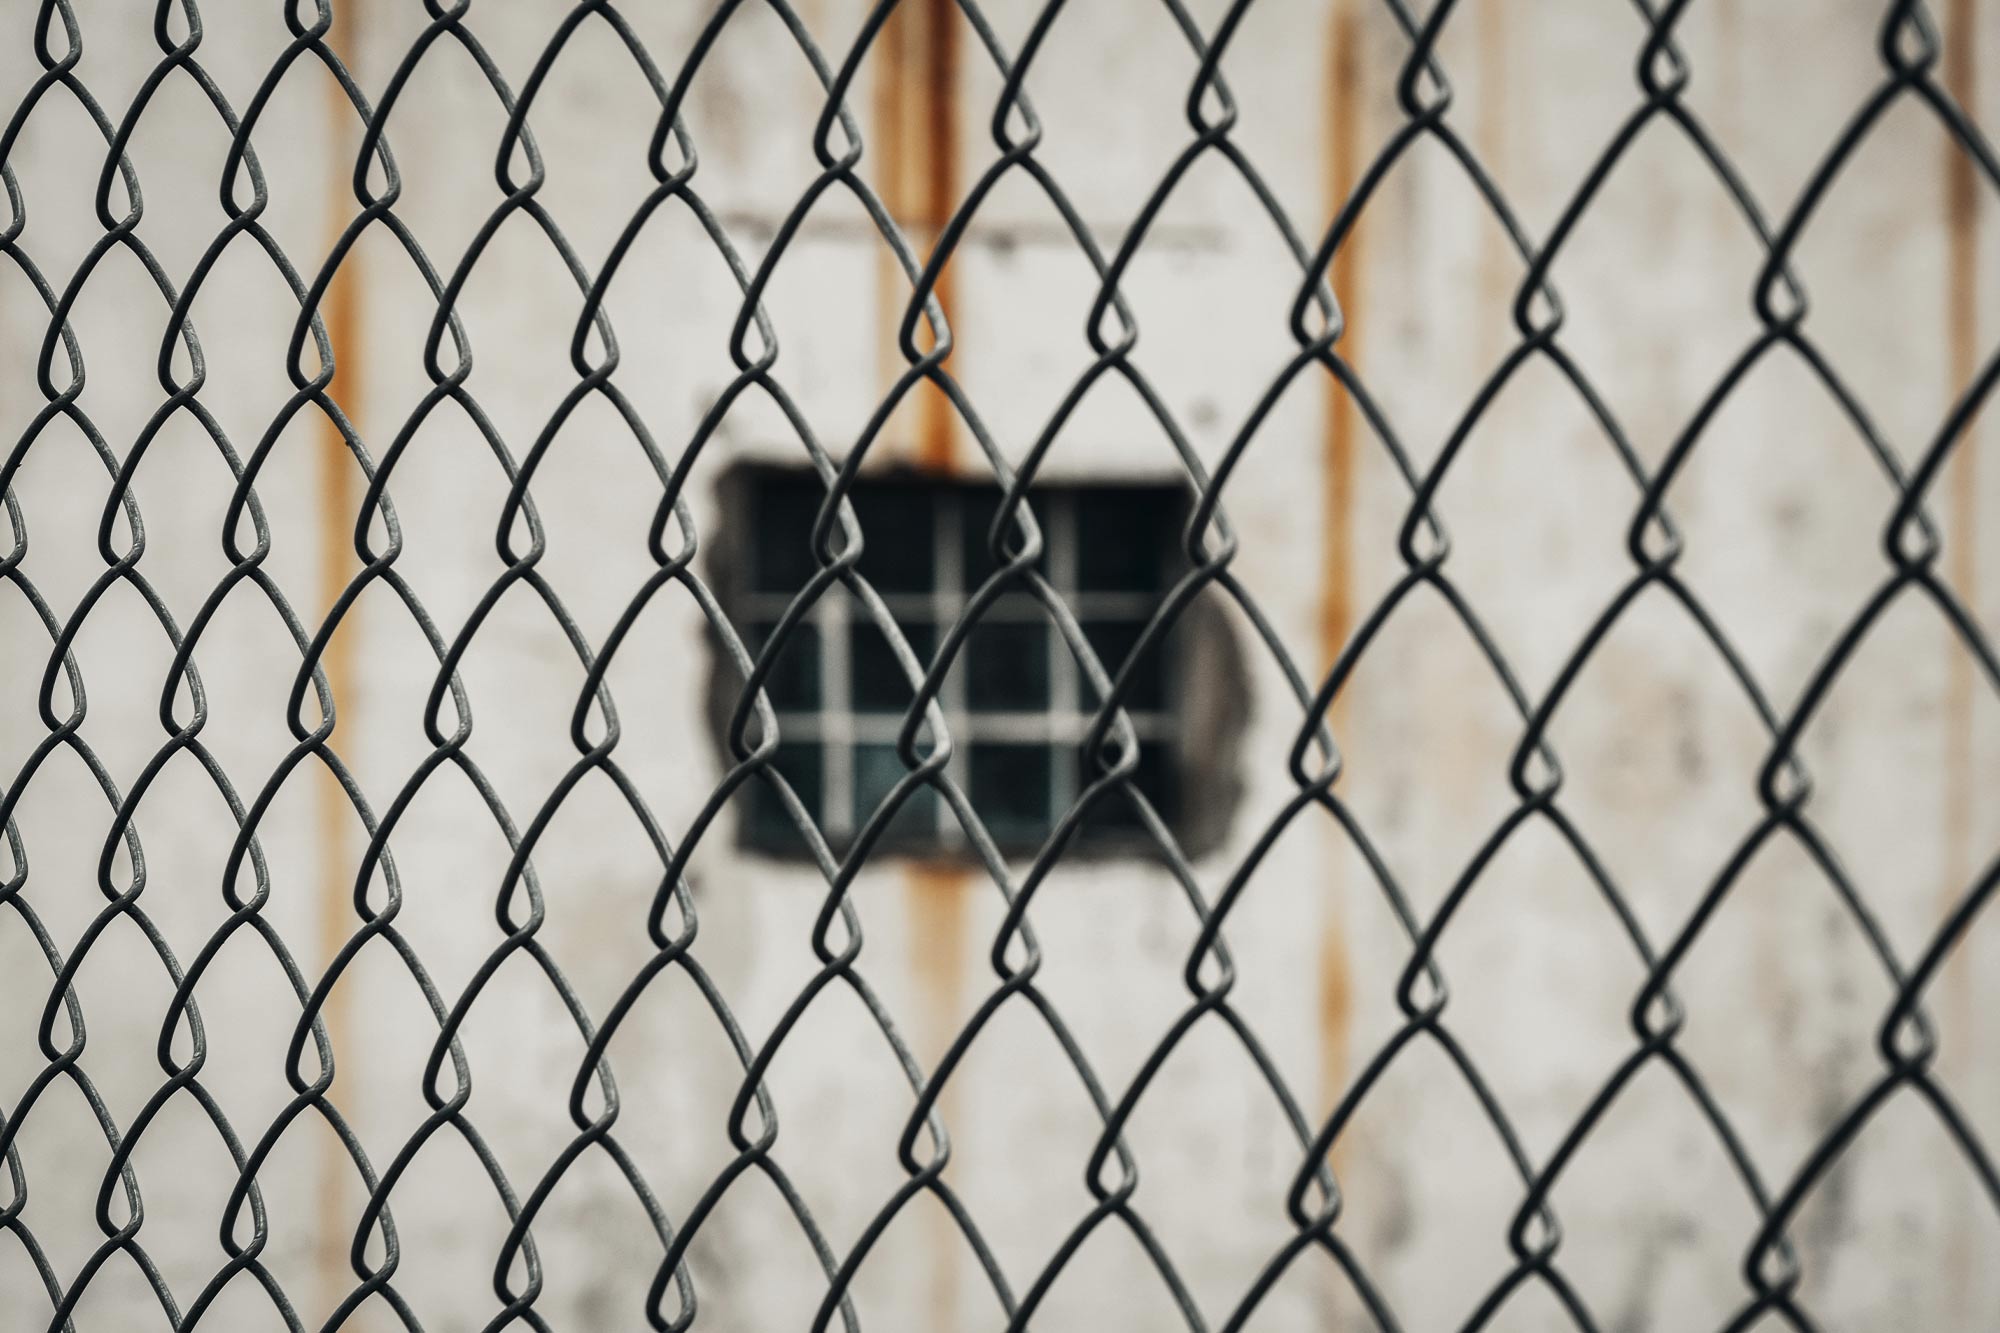 A concrete wall is visible through a chainlink fence